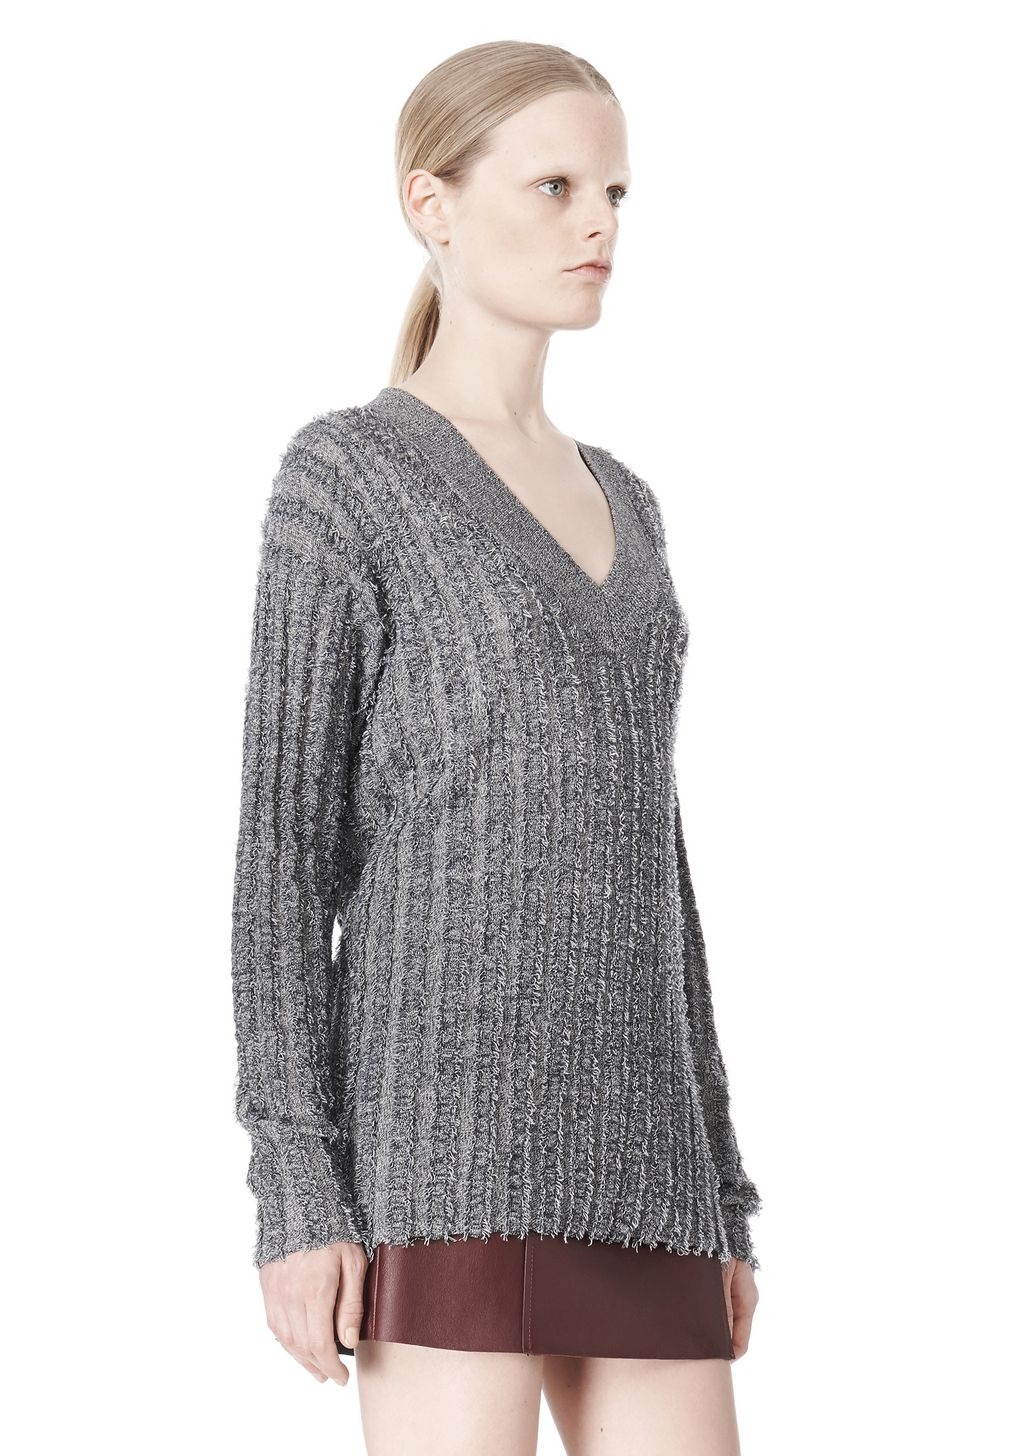 Lyst - Alexander wang Brushed Mohair and Goat Fur Pullover in Gray